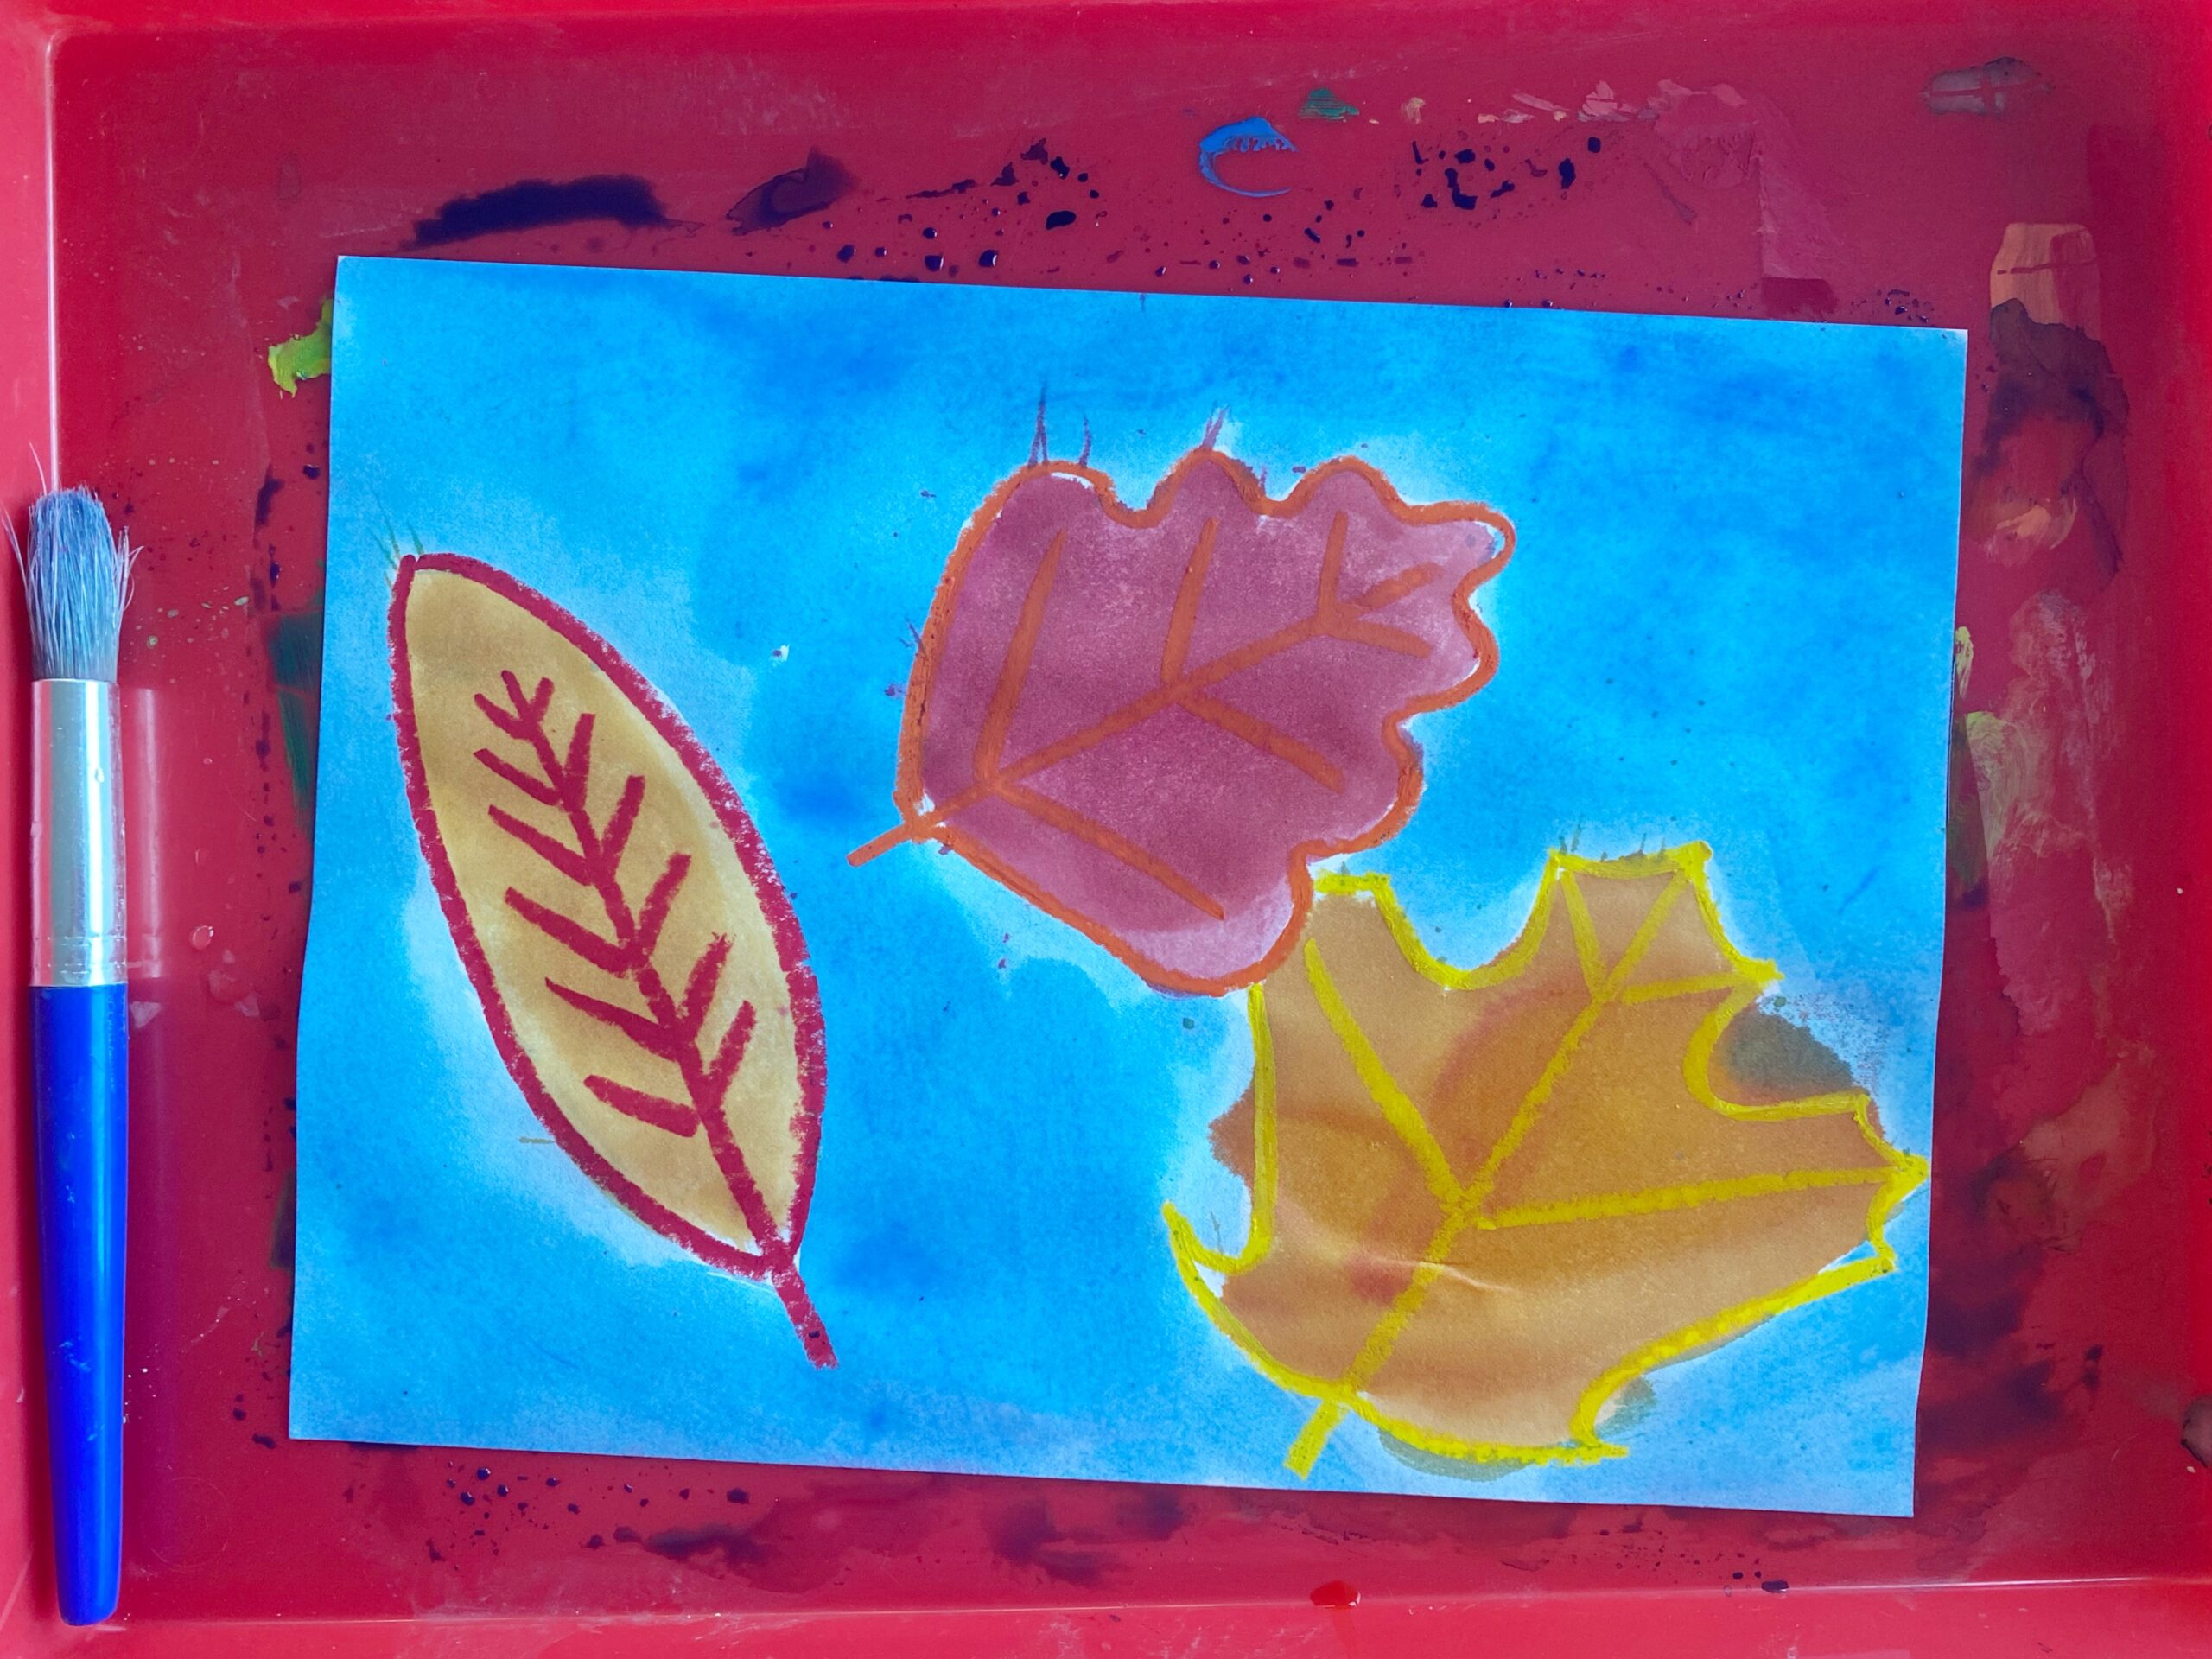 Falling Leaves: Creating ways to explore Autumn while learning about Parts of a Leaf and Warm Colors (Red, Orange, Yellow)